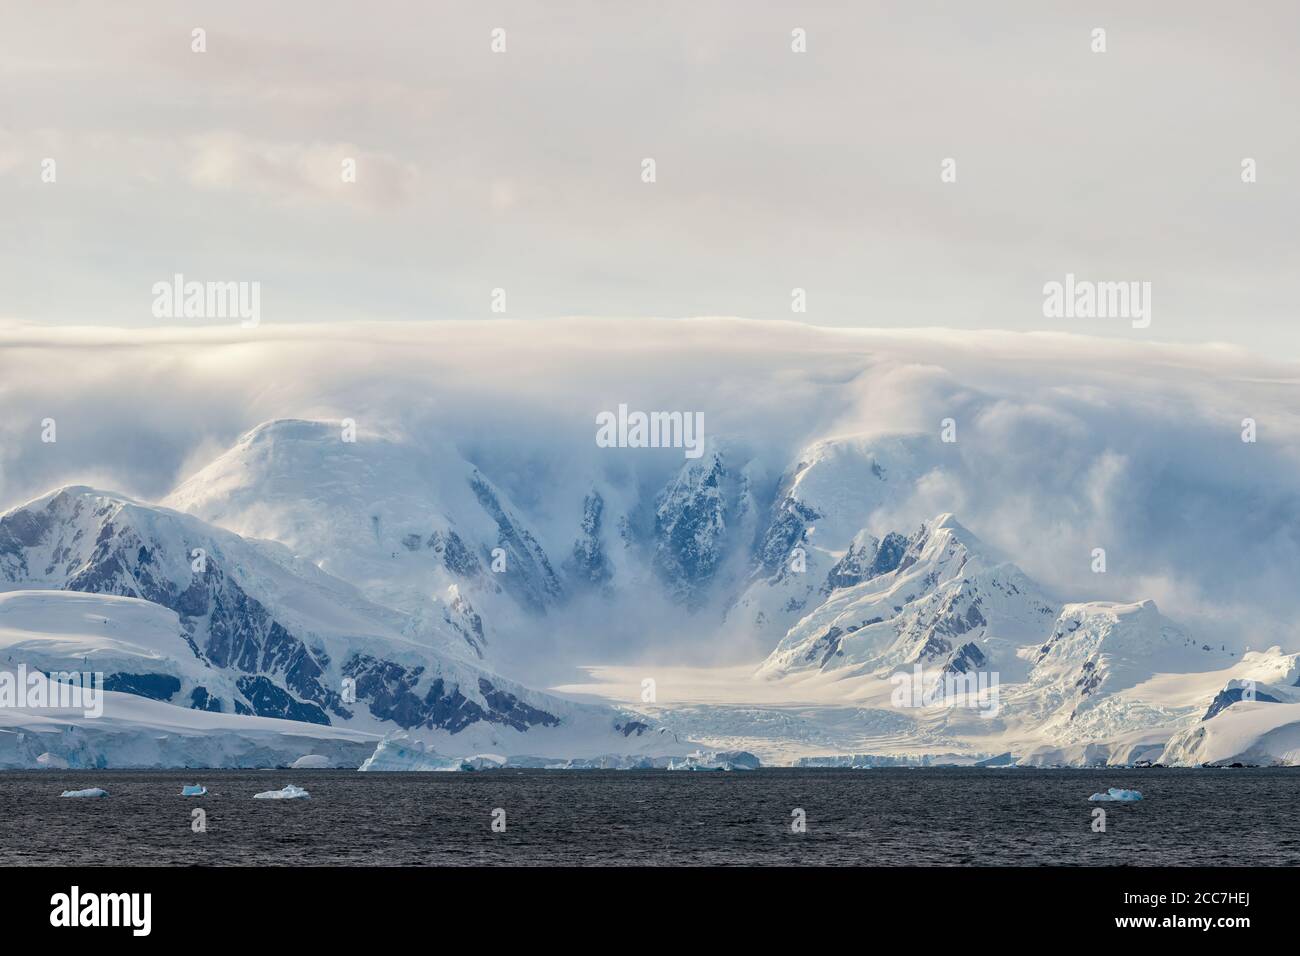 Glacier covered mountains enveloped in clouds in Antarctica. Stock Photo